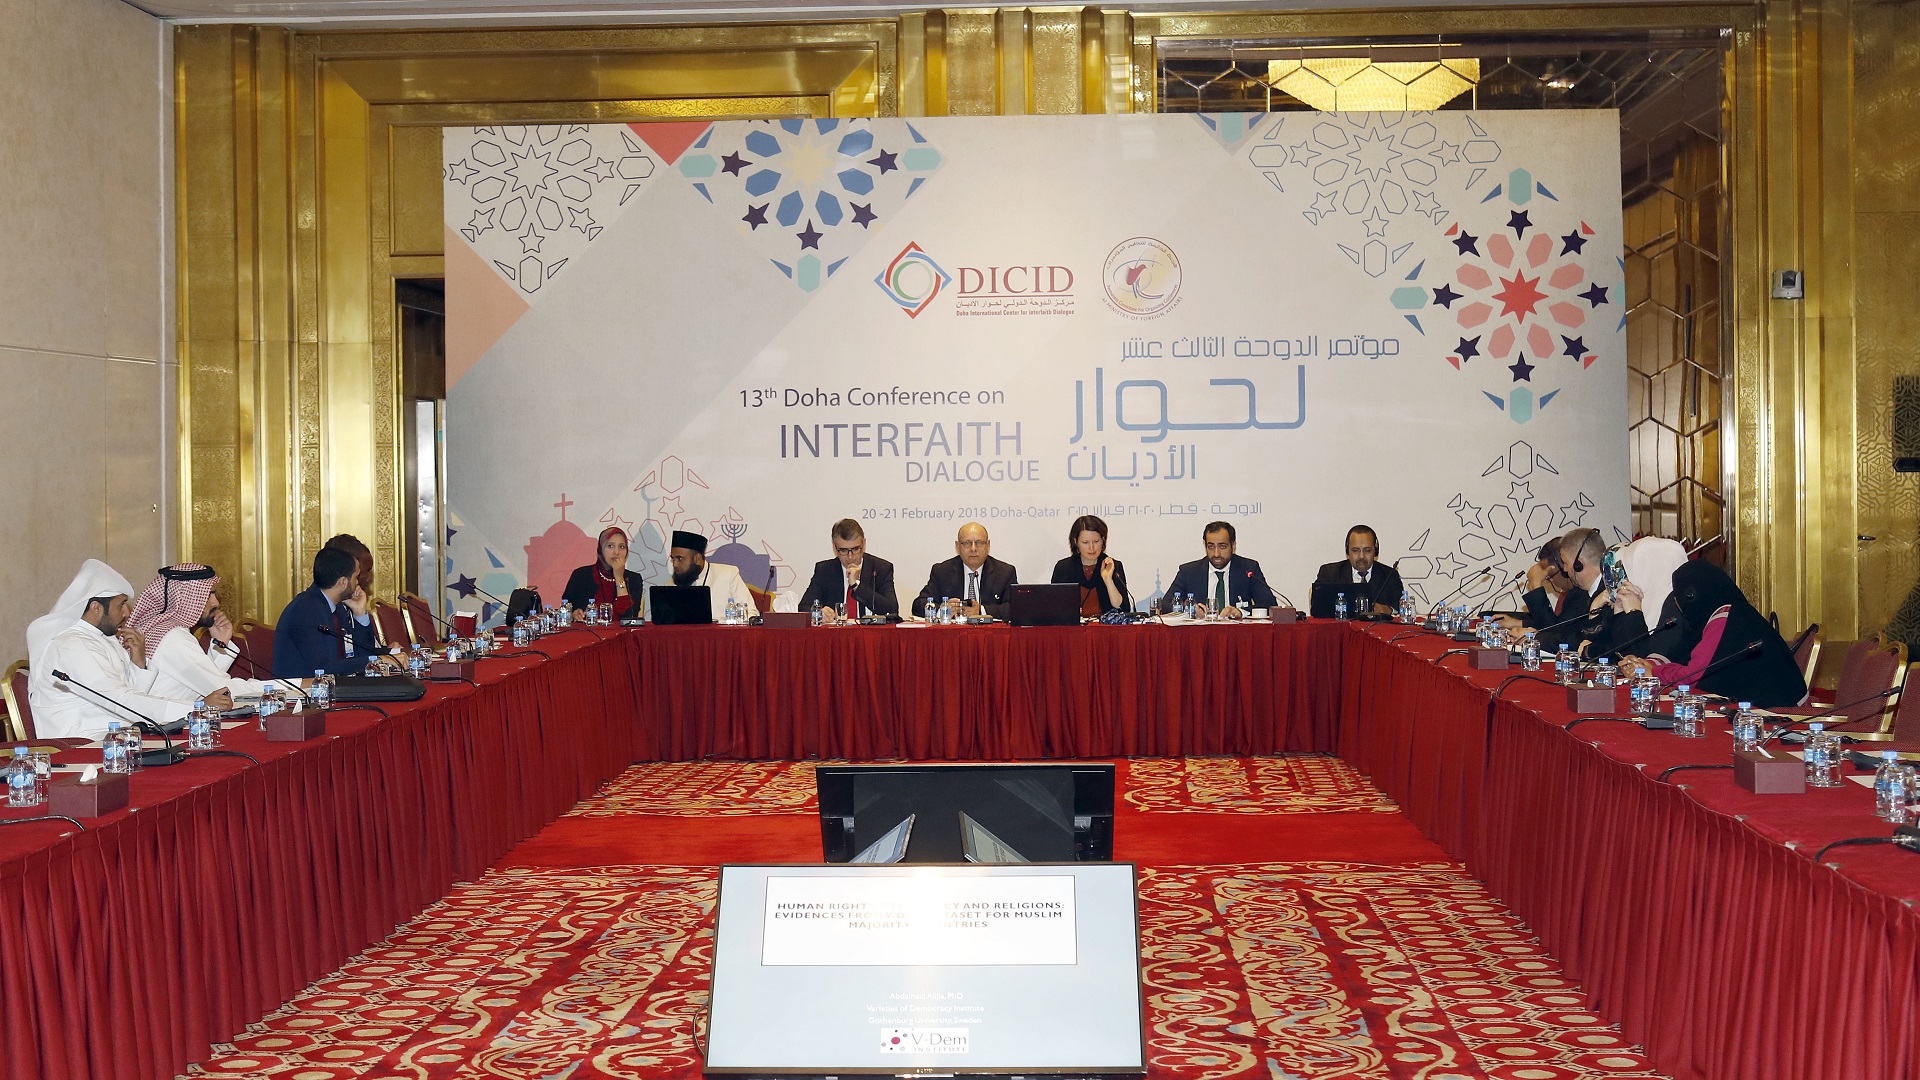 14th Doha Interfaith Dialogue Conference Kicks off Tuesday with Wide International Participation